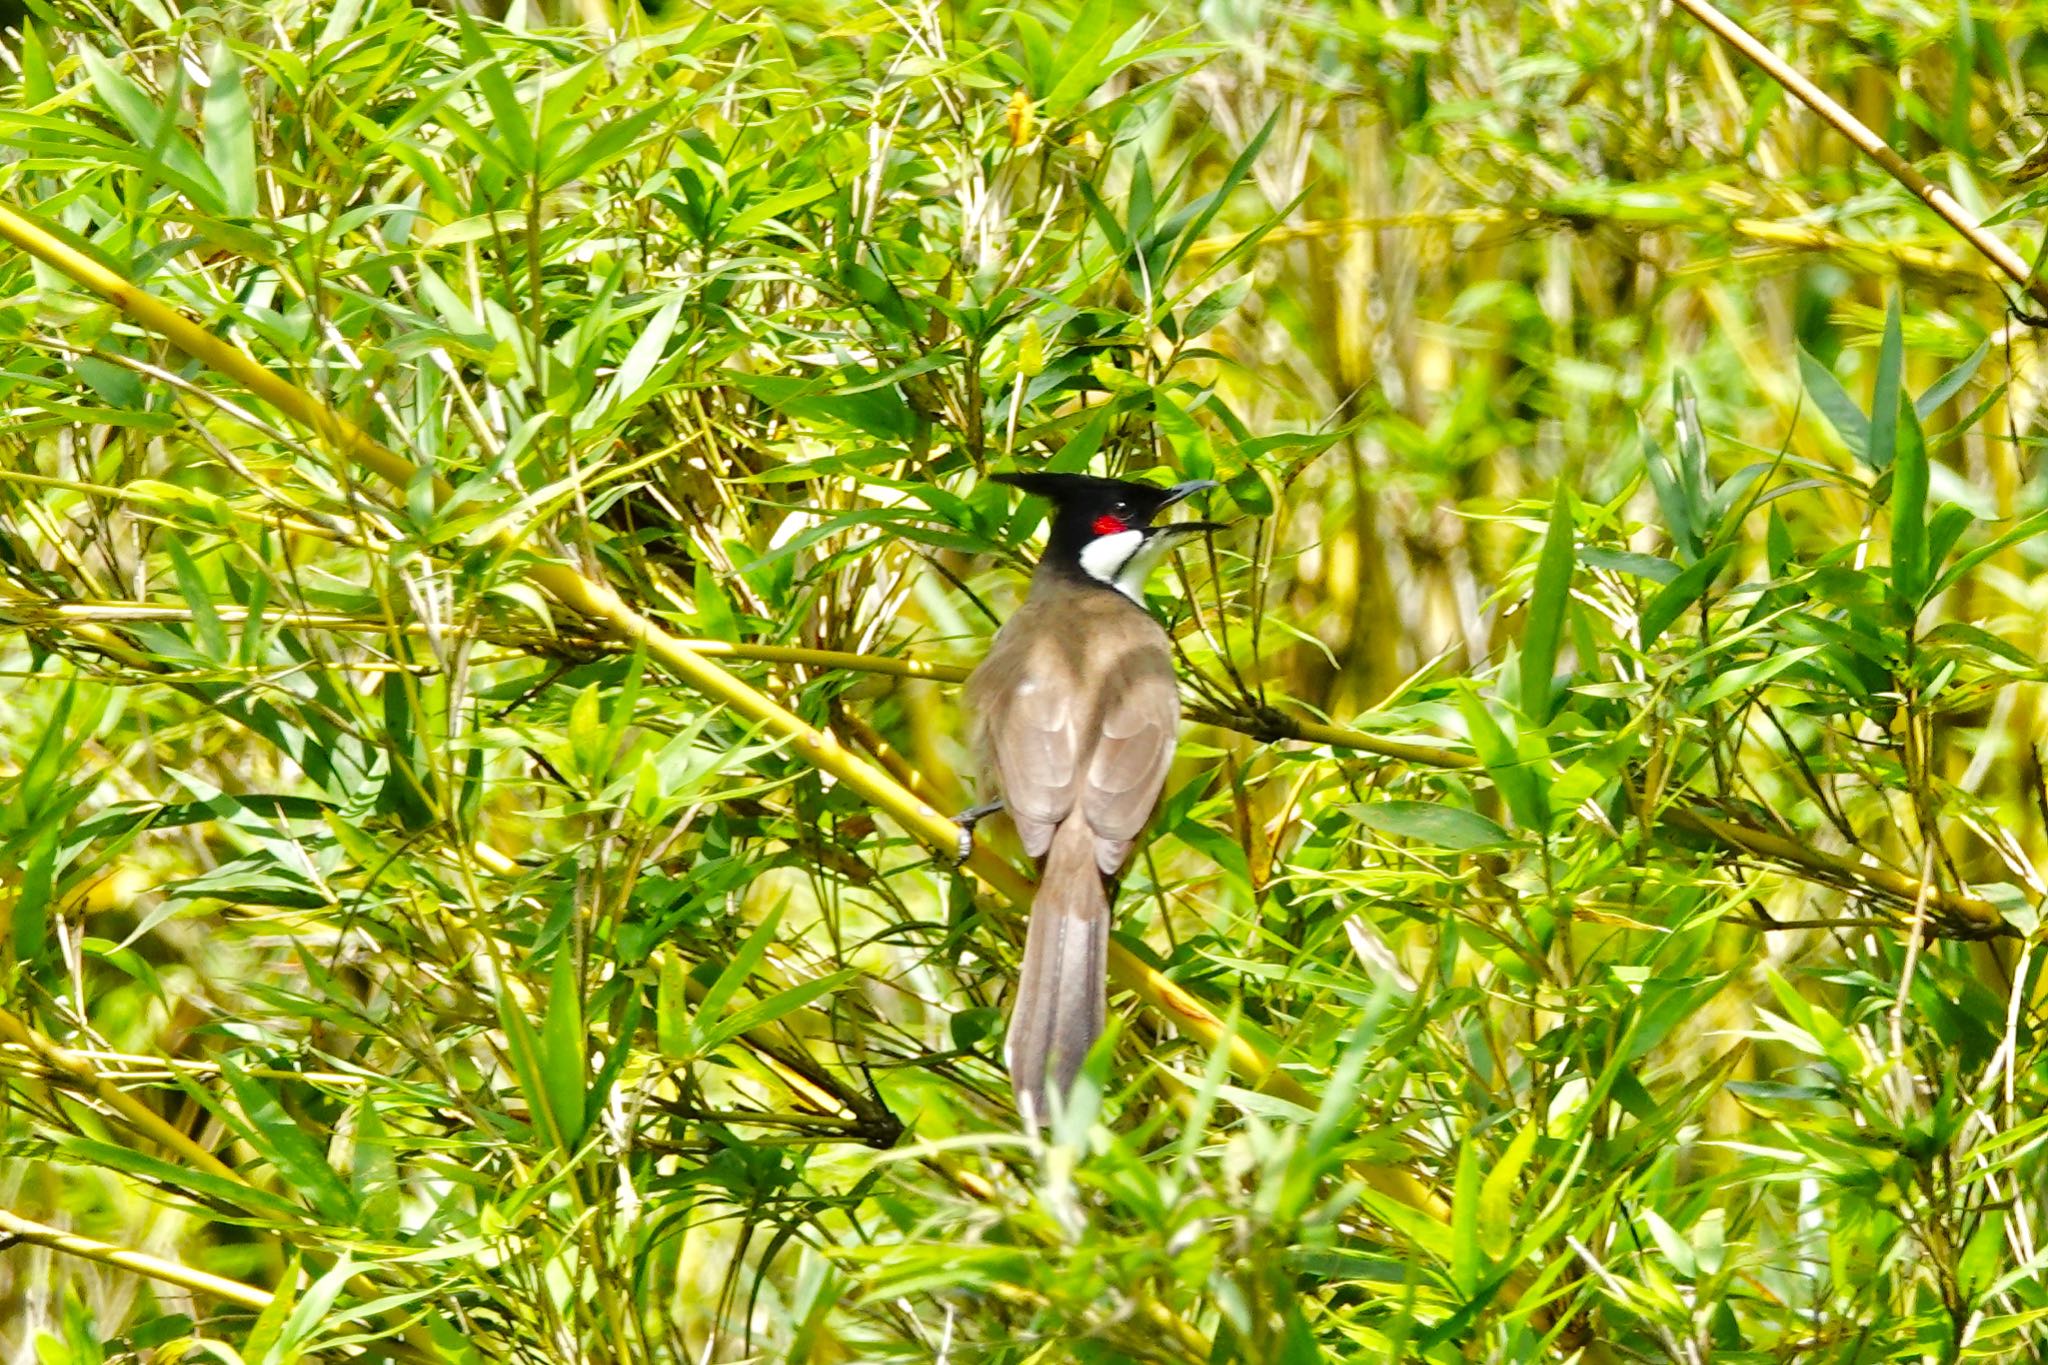 Photo of Red-whiskered Bulbul at Singapore Botanic Gardens by のどか